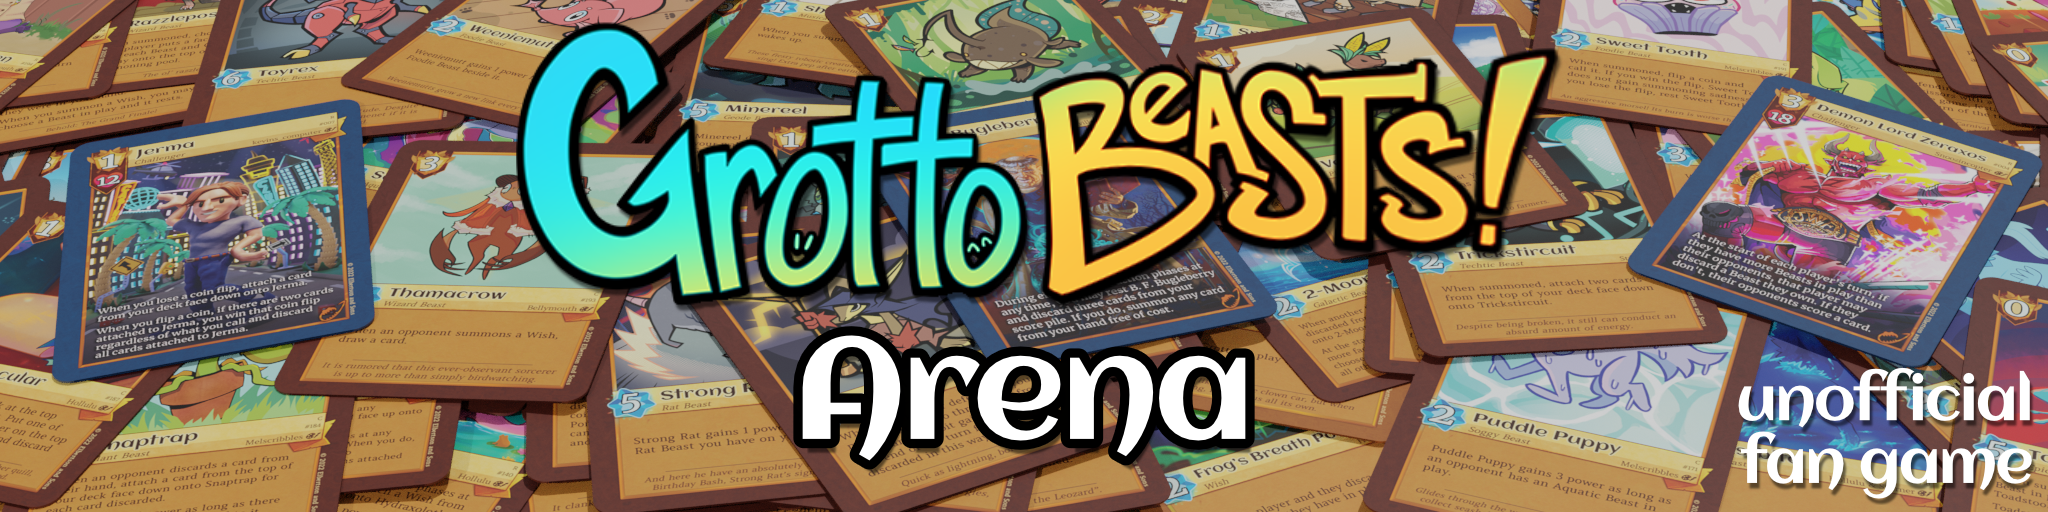 Grotto Beasts Arena